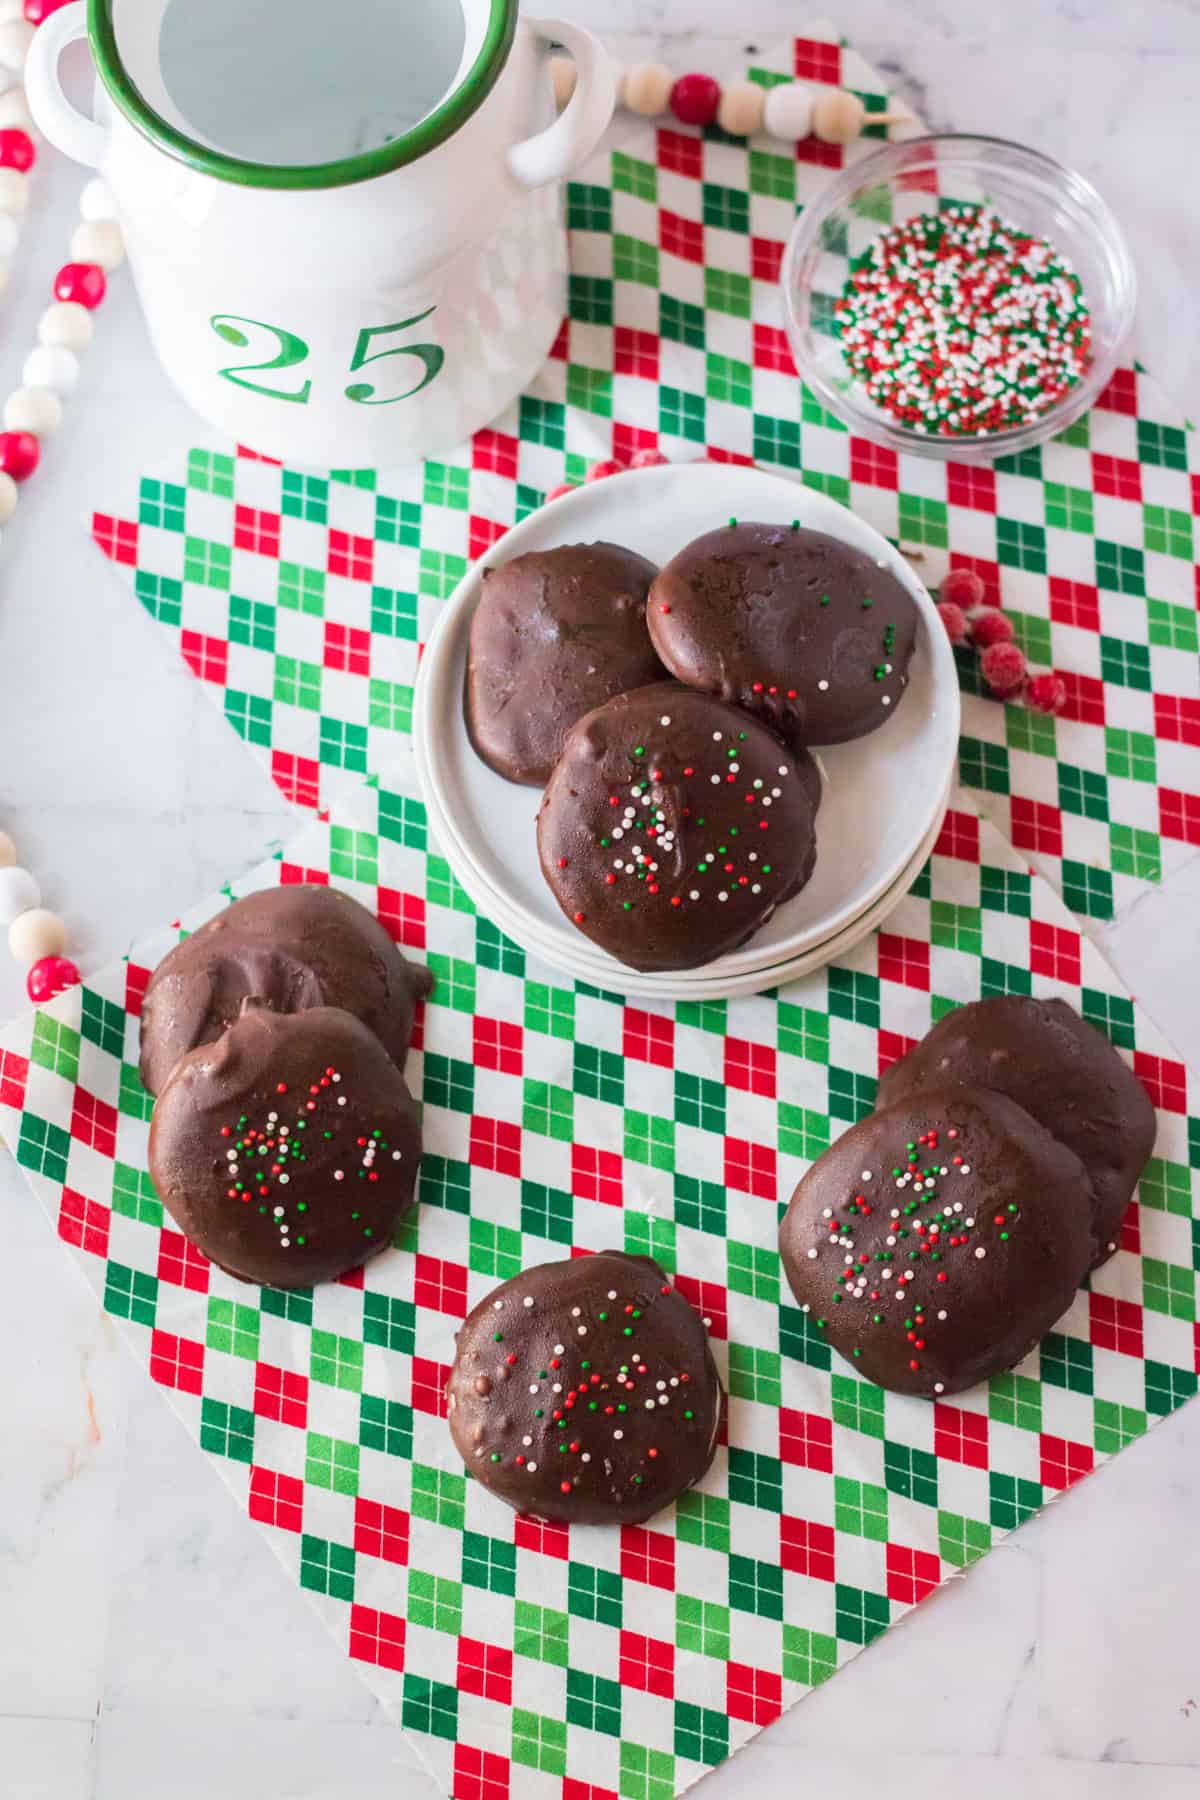 Copycat york peppermint patties with Christmas sprinkles on white plate and around plate on holiday napkin.